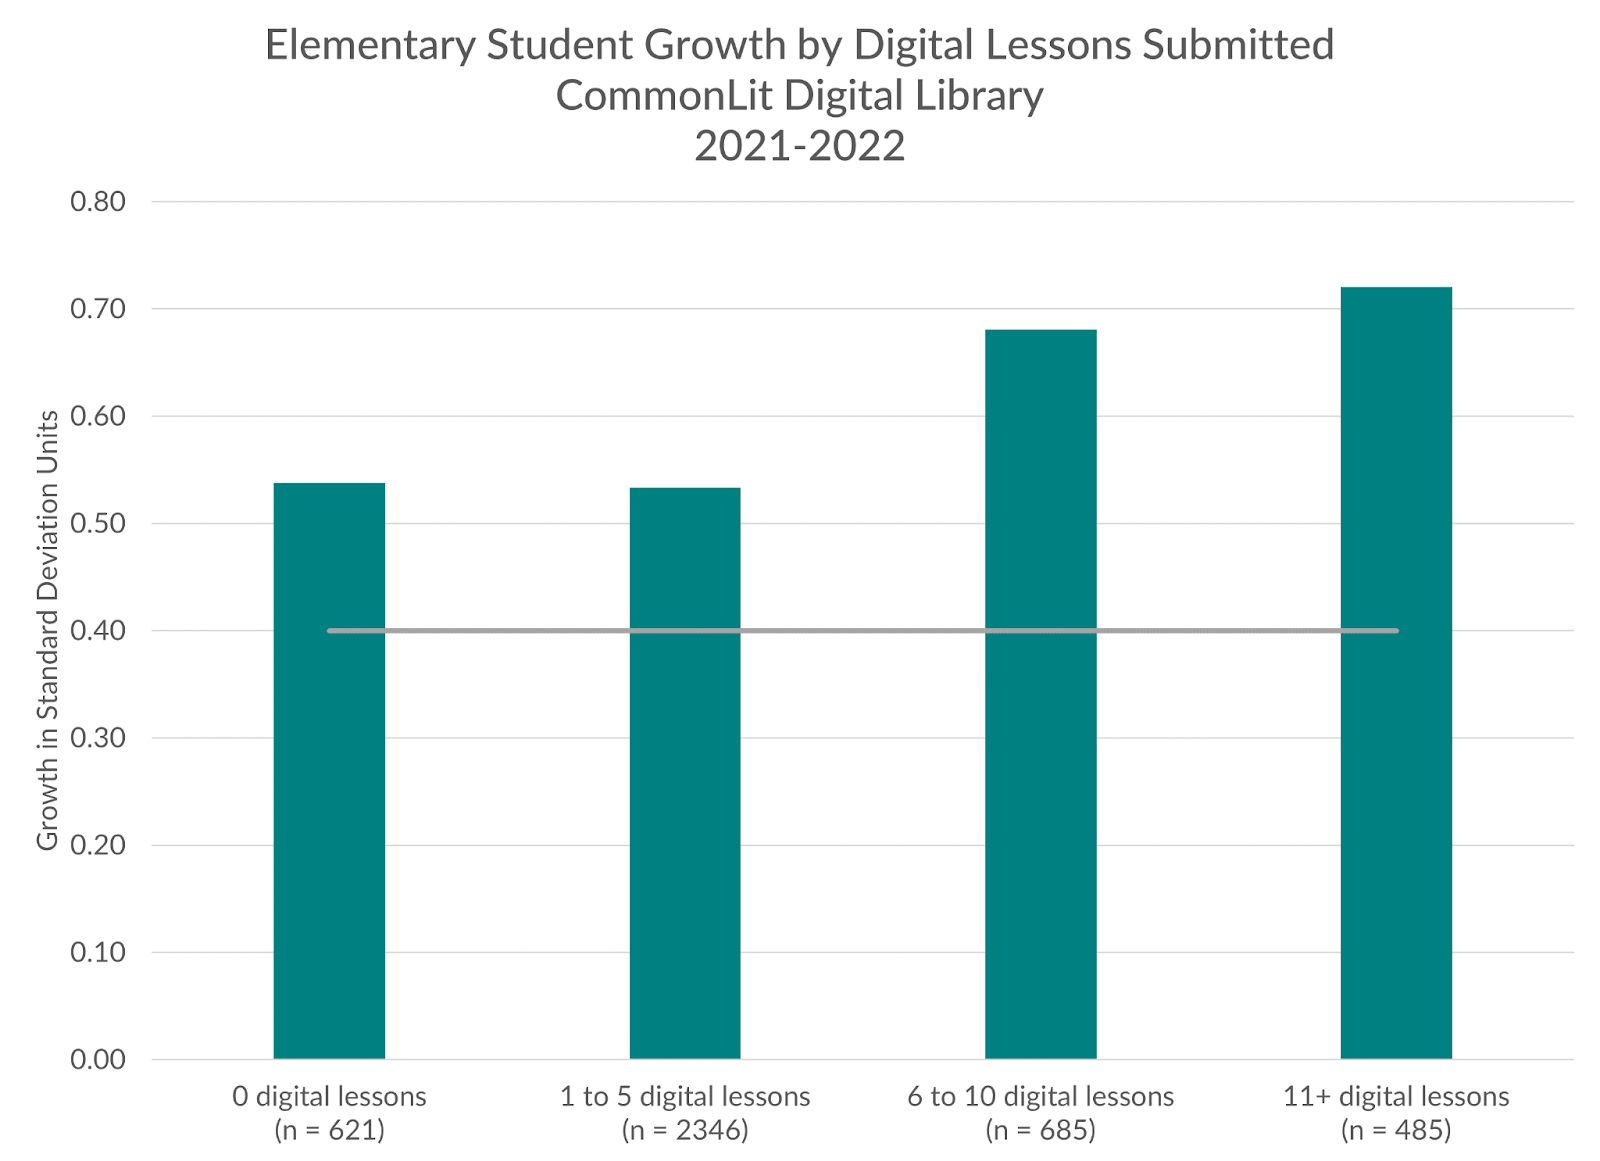 Bar graph showing elementary student growth by digital lessons submitted in the CommonLit digital library